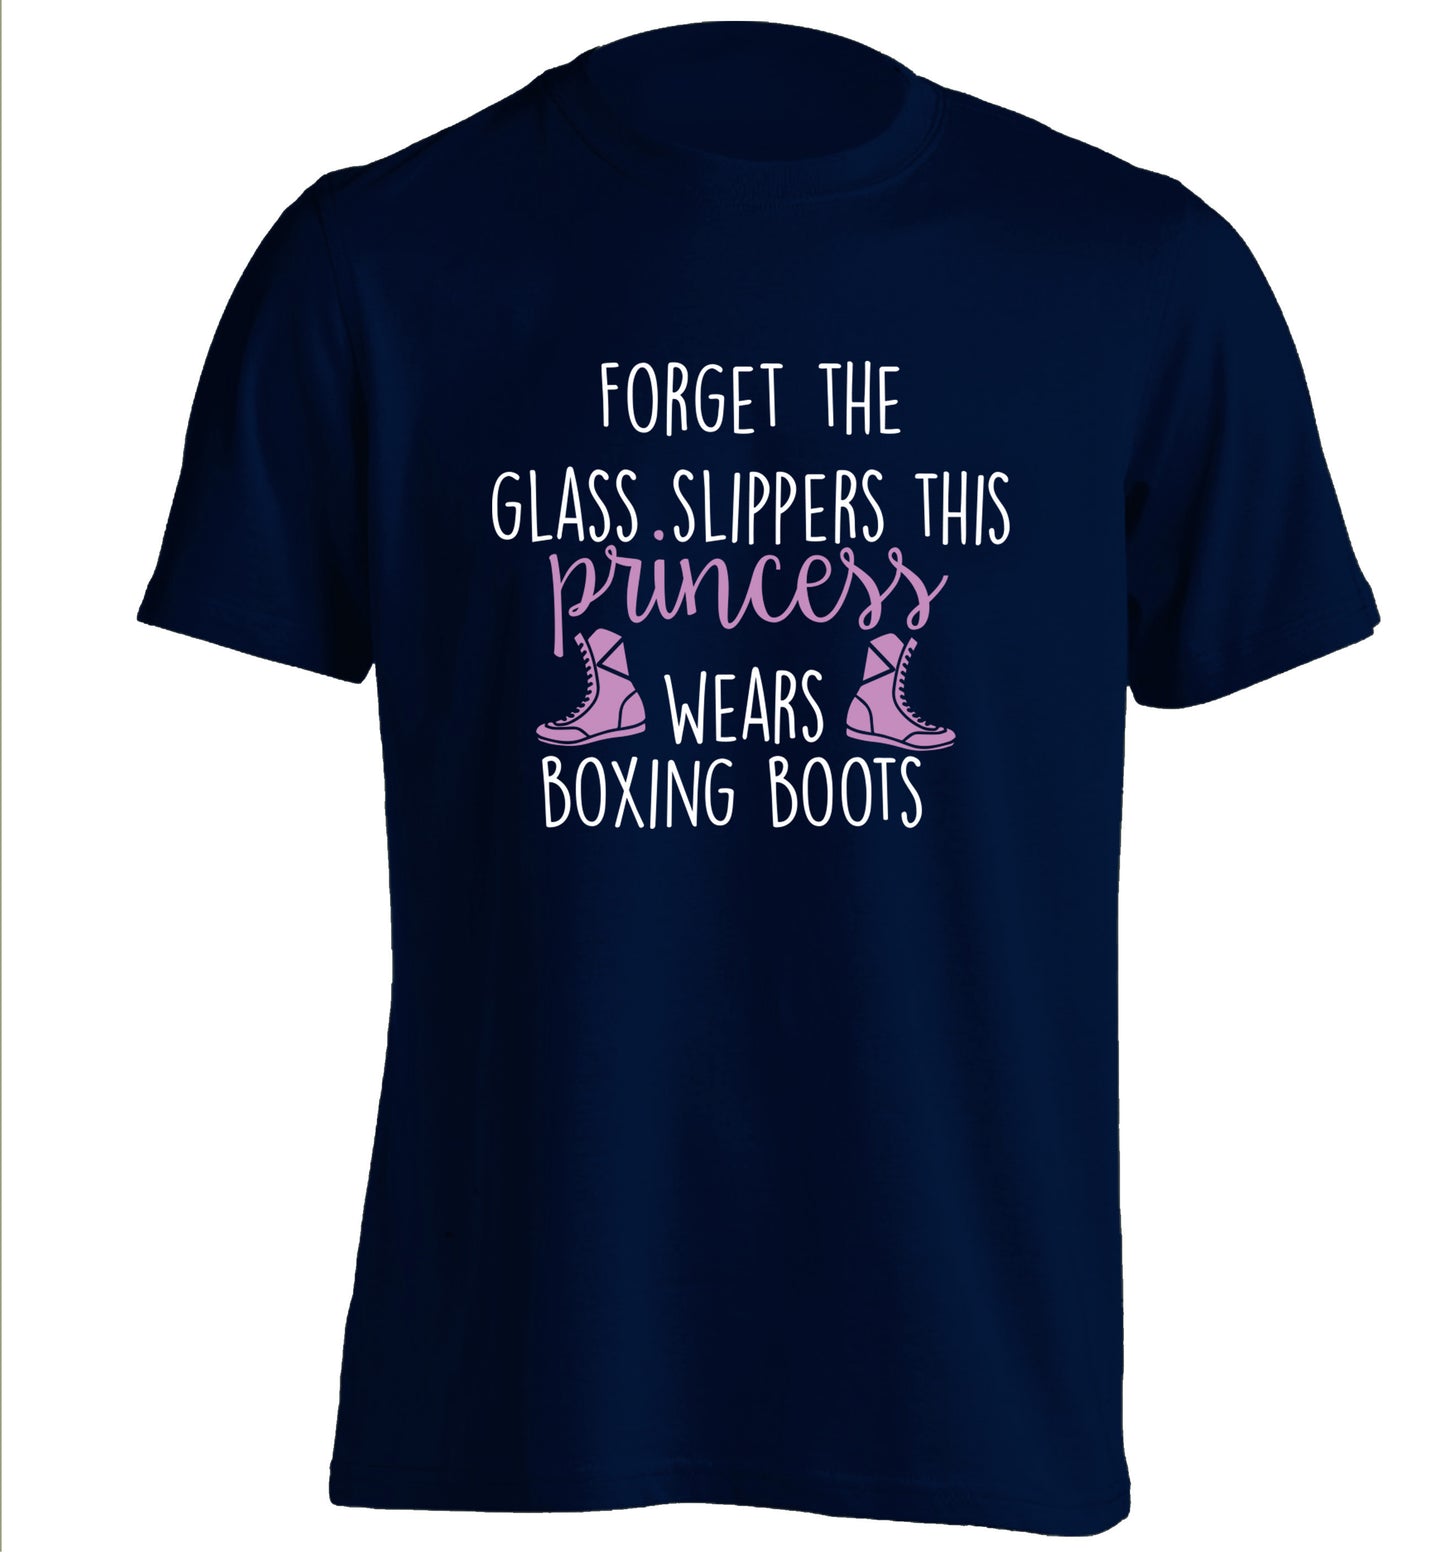 Forget the glass slippers this princess wears boxing boots adults unisex navy Tshirt 2XL